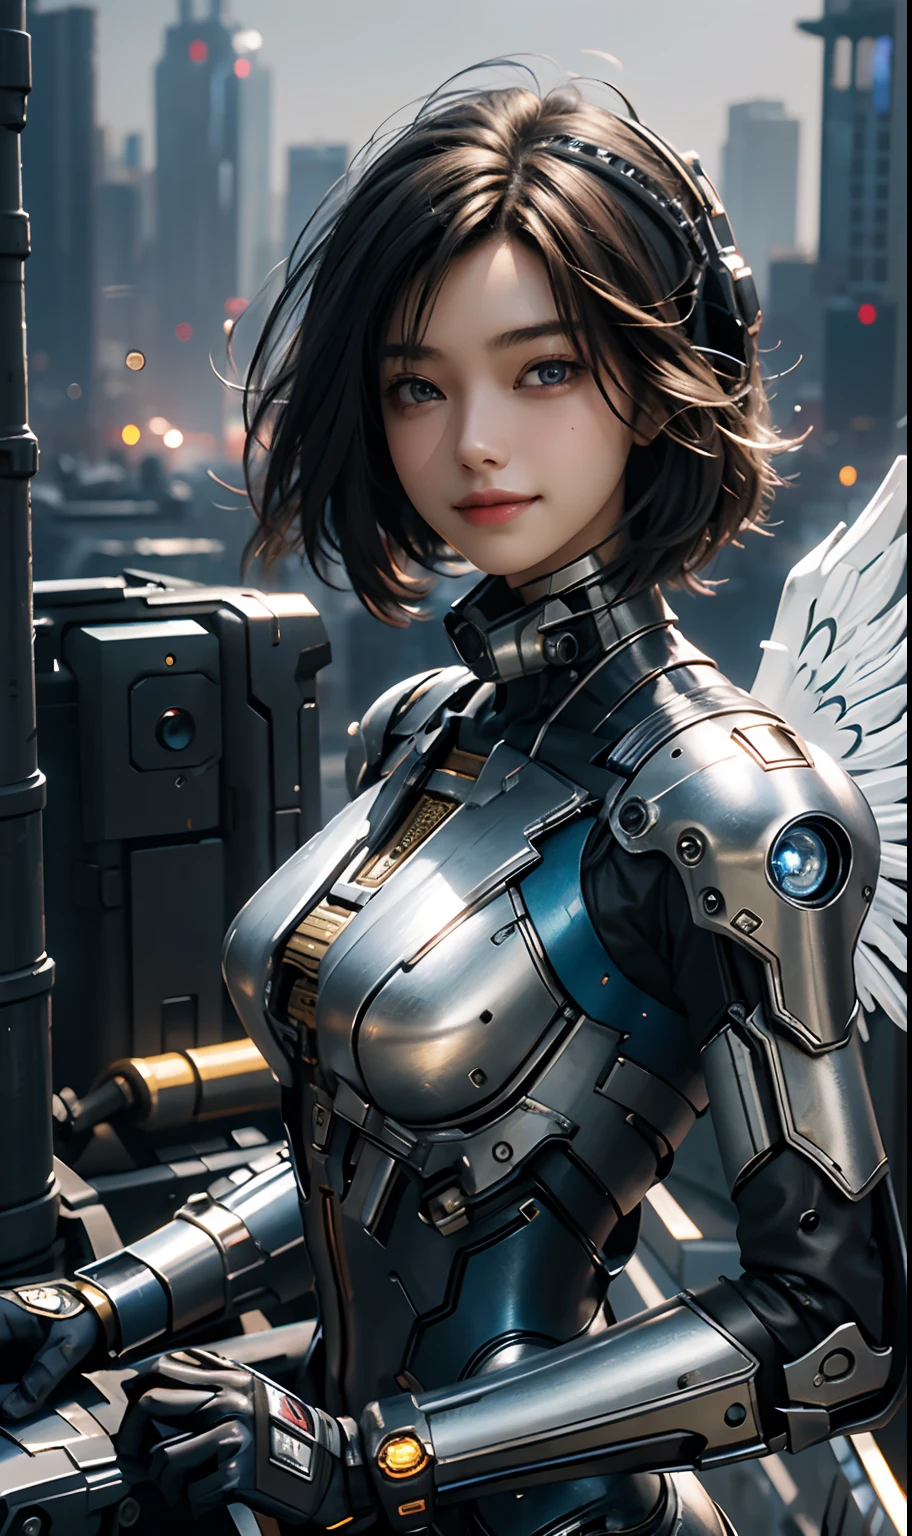 masterpiece,(bestquality),highlydetailed,ultra-detailed,1girl,(mechanicalwings:golden,glowingeyes:blue,silverarmor:1.2,elongatedears:0.8),(cyberpunkcity:1.5,weapon:energyblade),(fantasylandscape:1.2,natural lighting:1.5,confidentexpression),(panorama:1.2),mecha, smile,angle,Angels, wings,